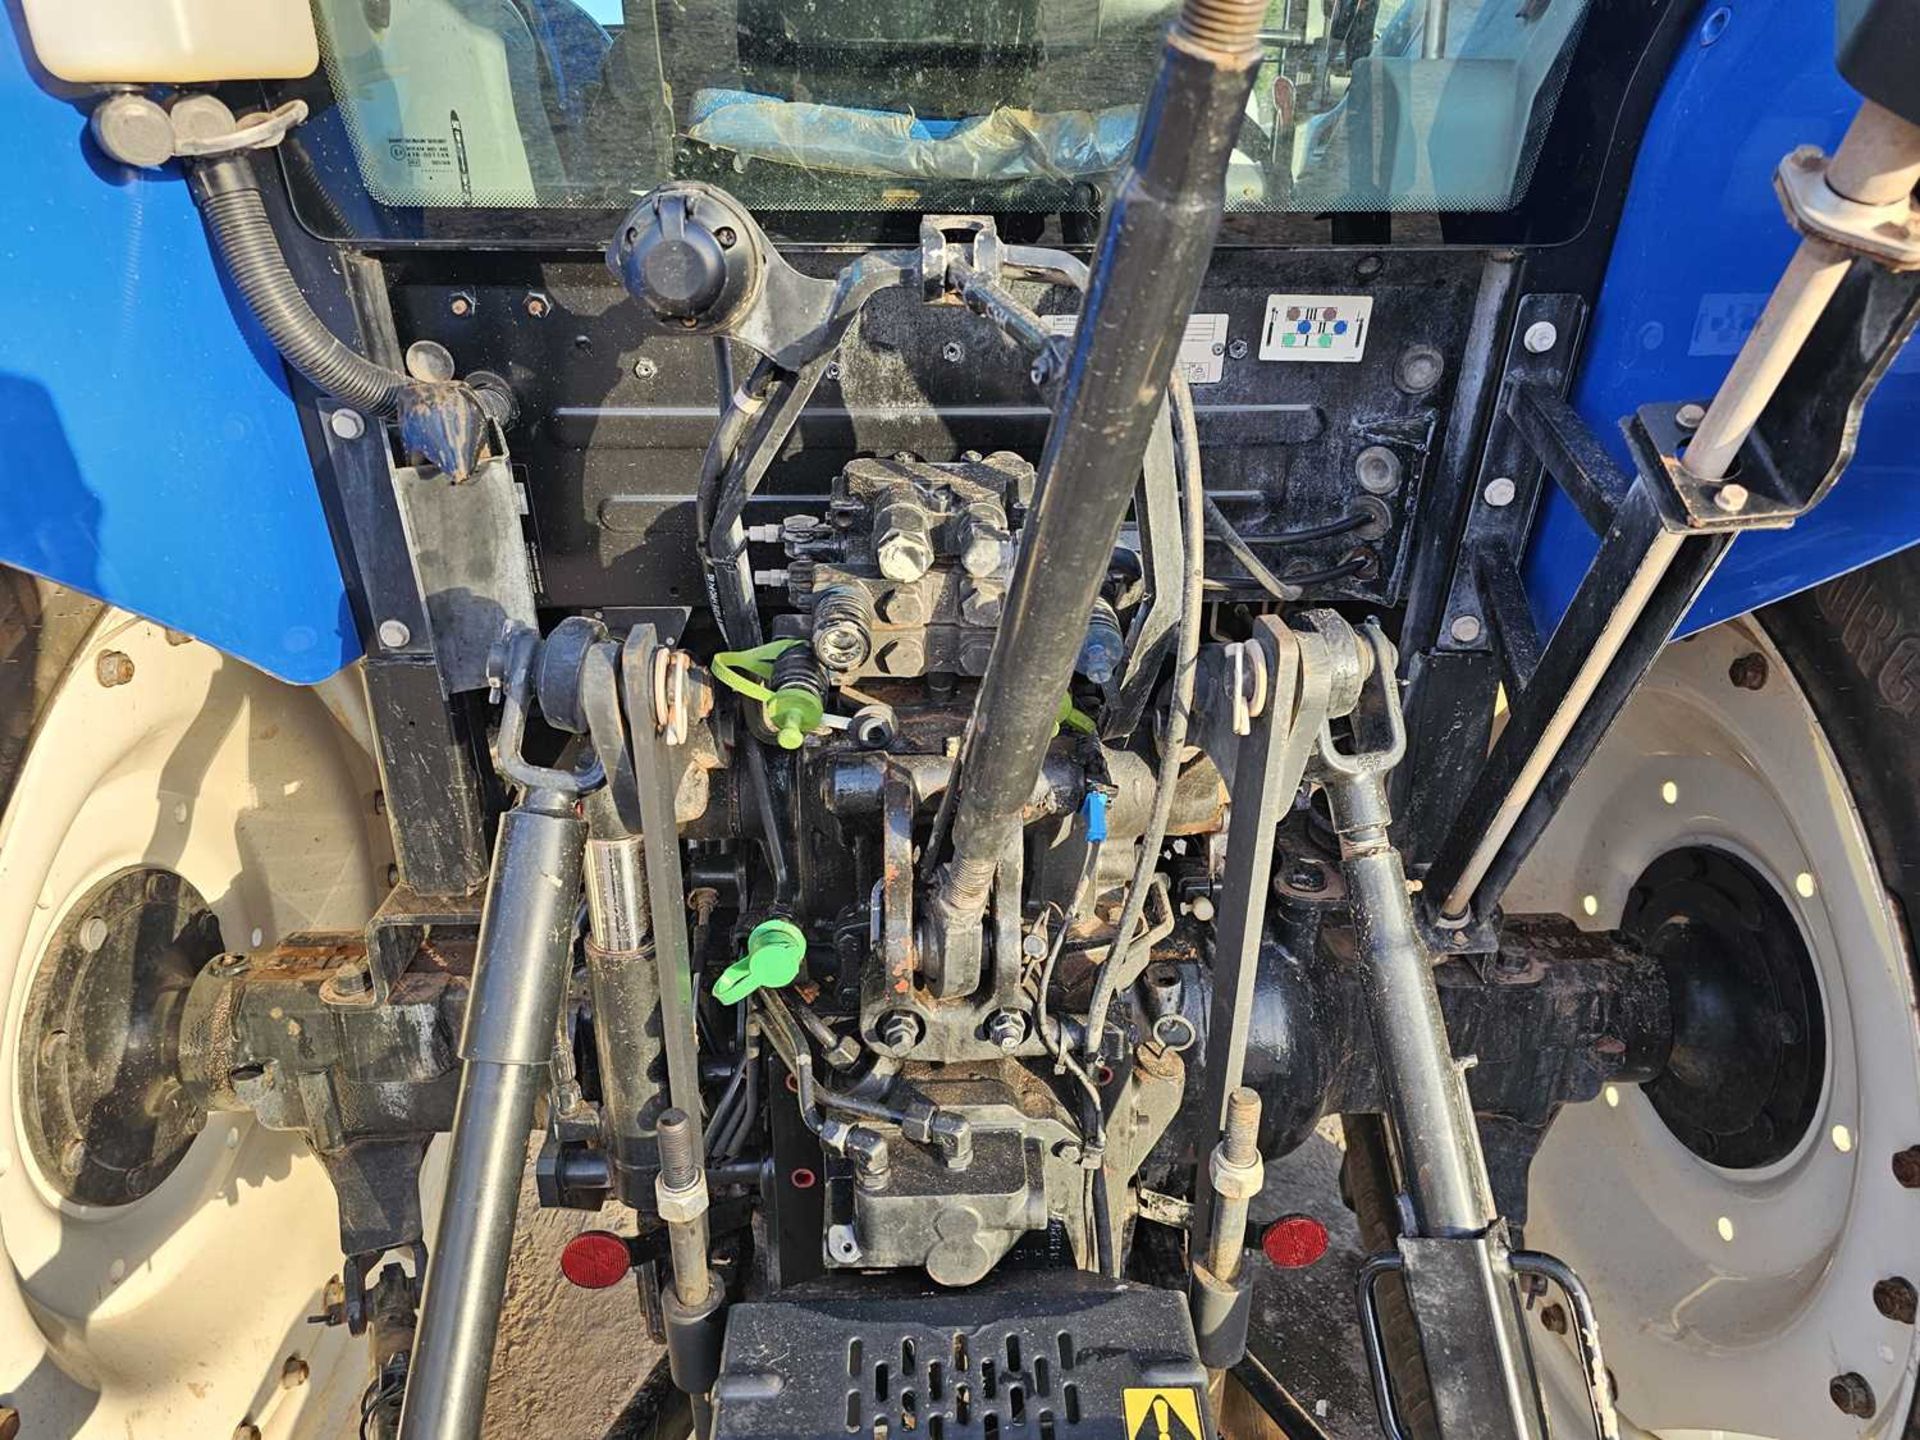 2015 New Holland T4.85 2WD Tractor, Front Weights, 2 Spool Valves, A/C - Image 13 of 28